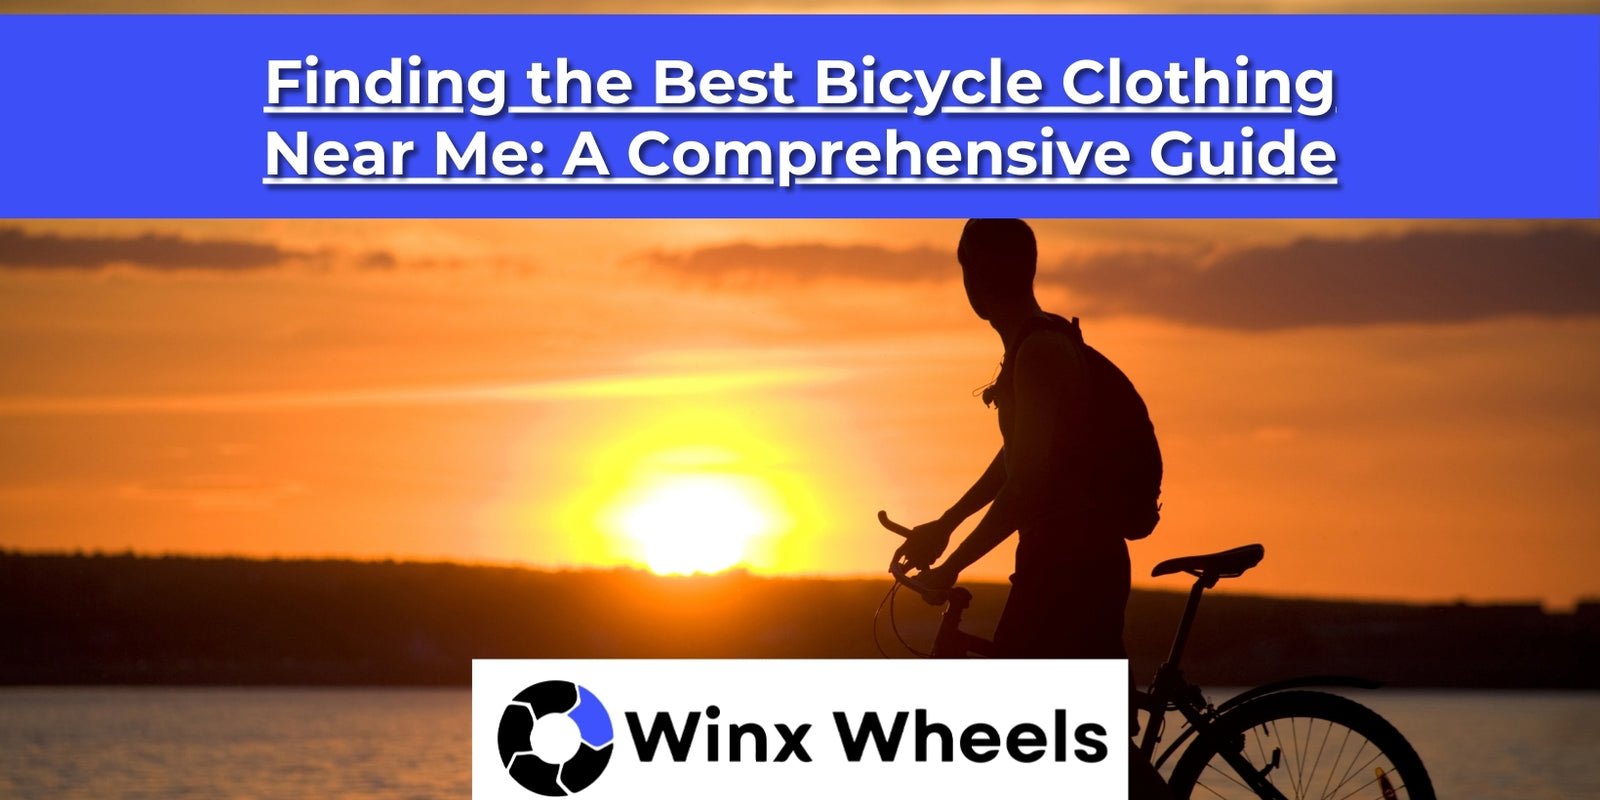 Finding the Best Bicycle Clothing Near Me A Comprehensive Guide